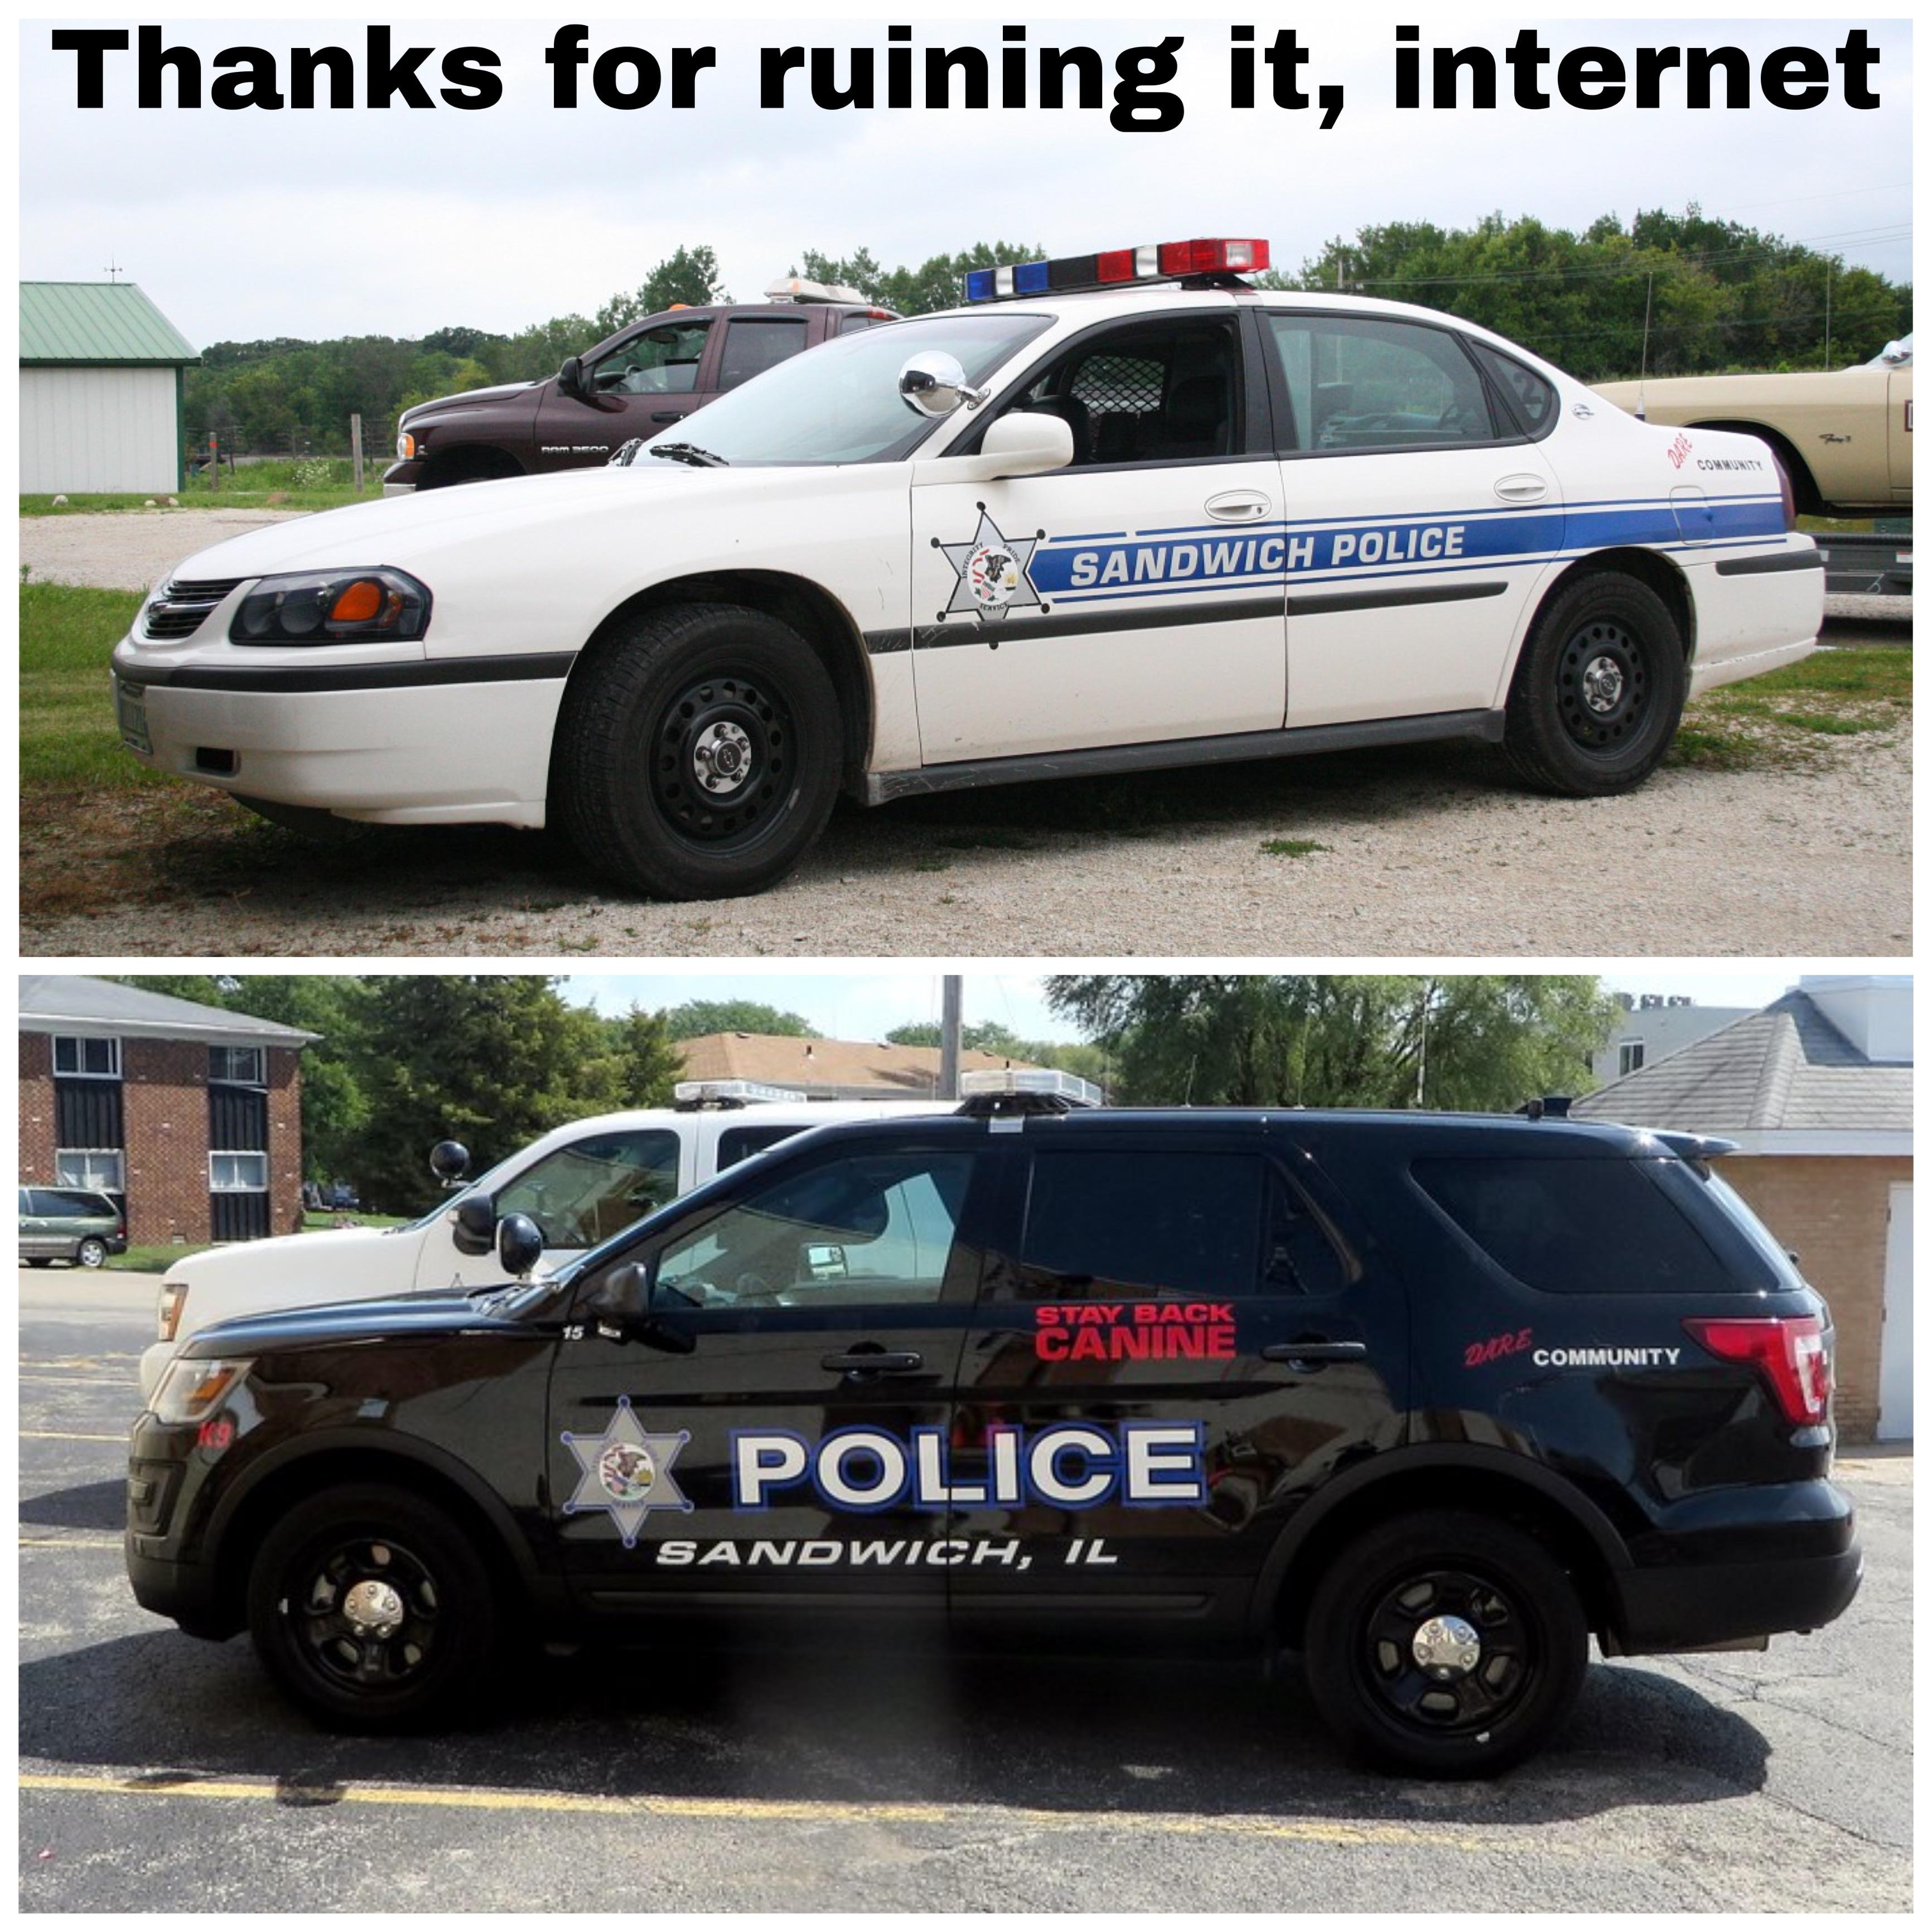 police - Thanks for ruining it, internet Sandwich Police Stay Back Camine Community Police Sandwich, Il